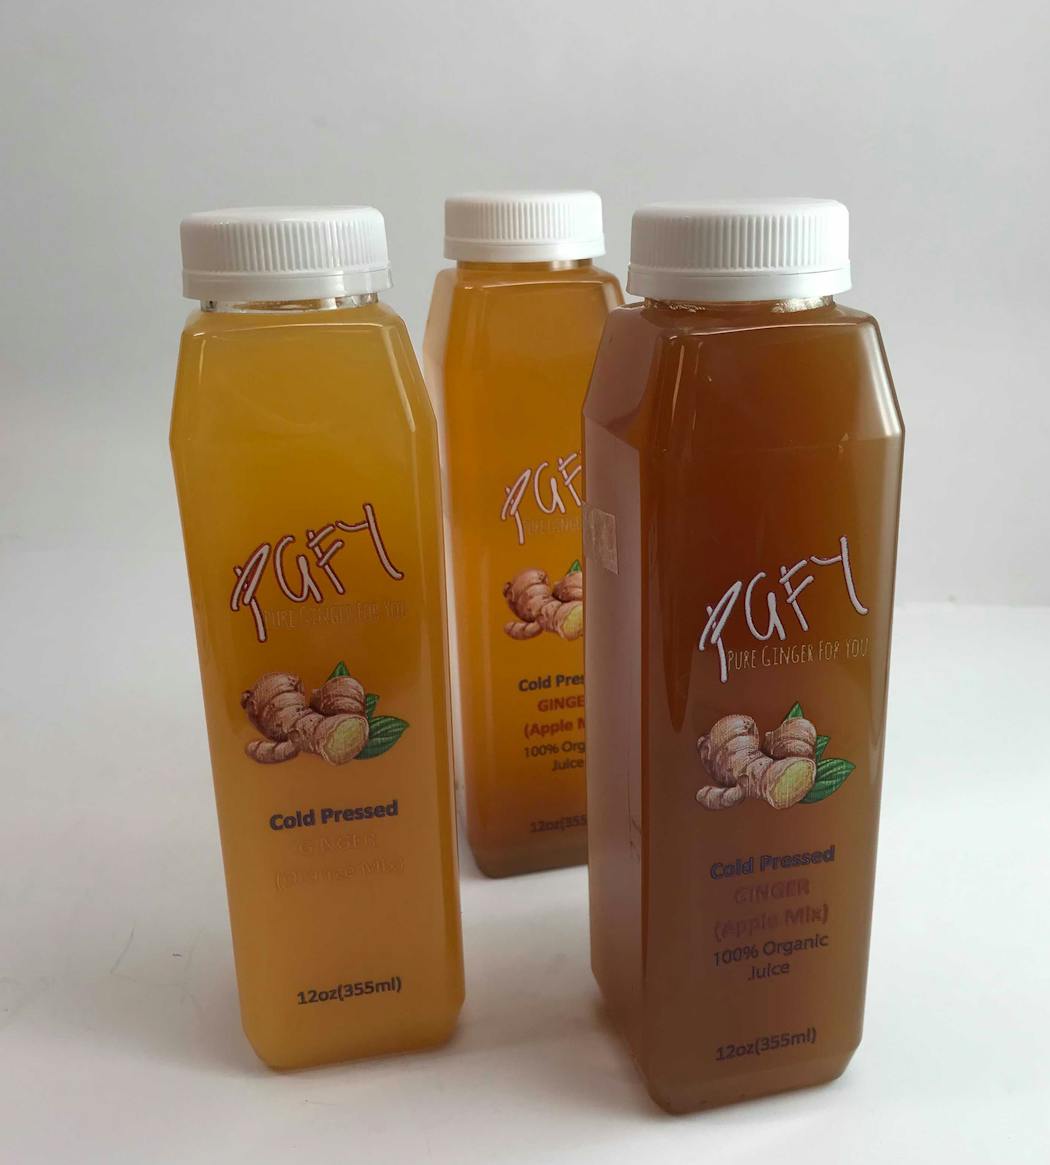 Cold-pressed juices from Pure Ginger for You.